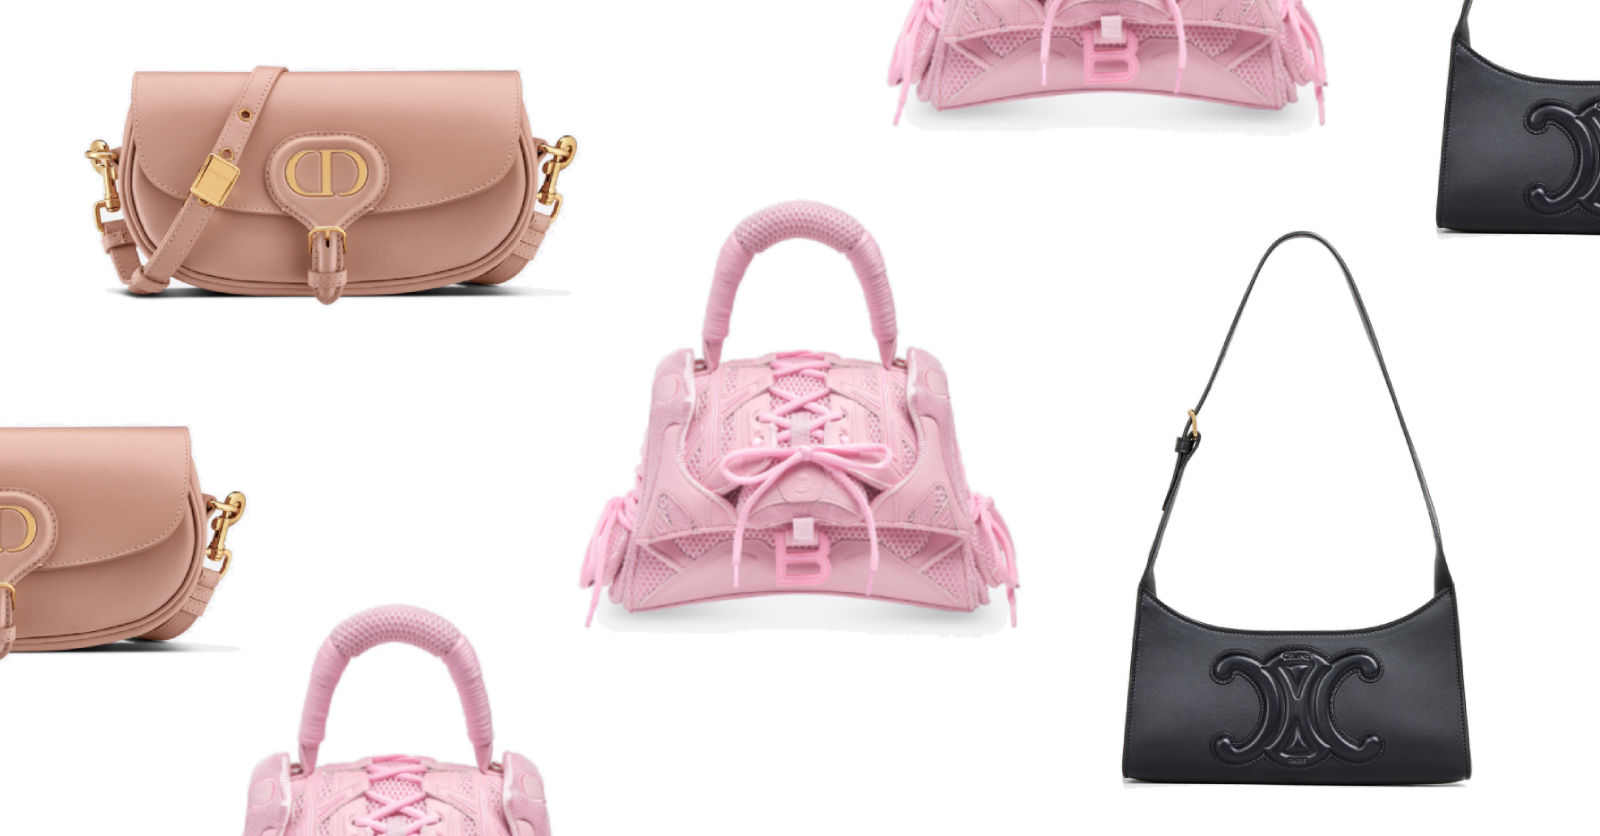 Balenciaga’s sneaker handbag and more new bags we can’t wait to wear in 2022